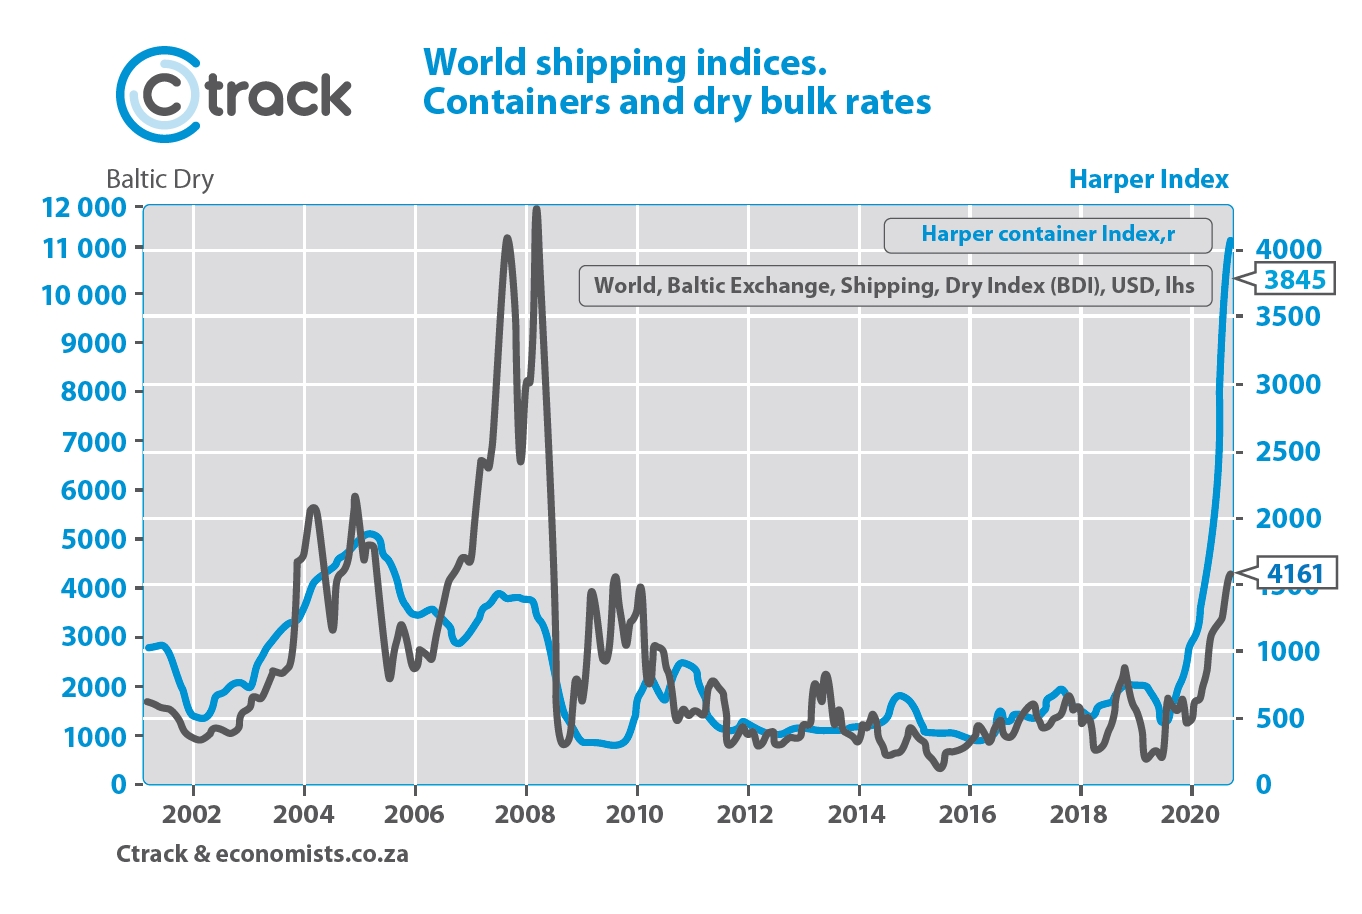 World-Shipping-indices.-Container-and-Dry-Bulk-Rates_Ctrack-2021